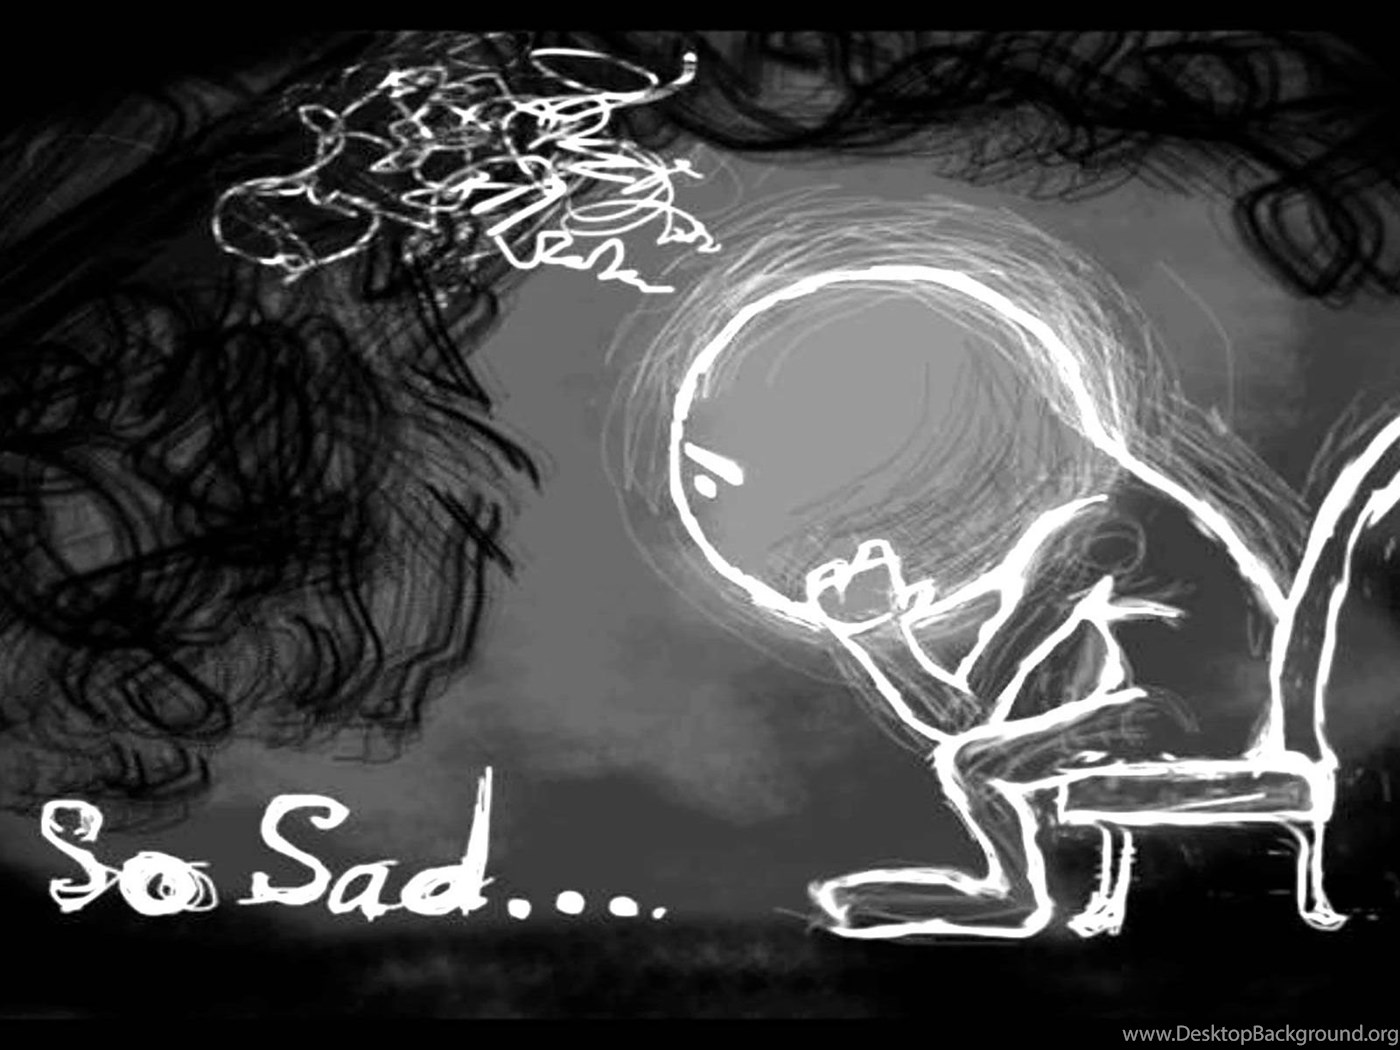 Free Download Sad Wallpapers Hd - So Sad Image Download , HD Wallpaper & Backgrounds